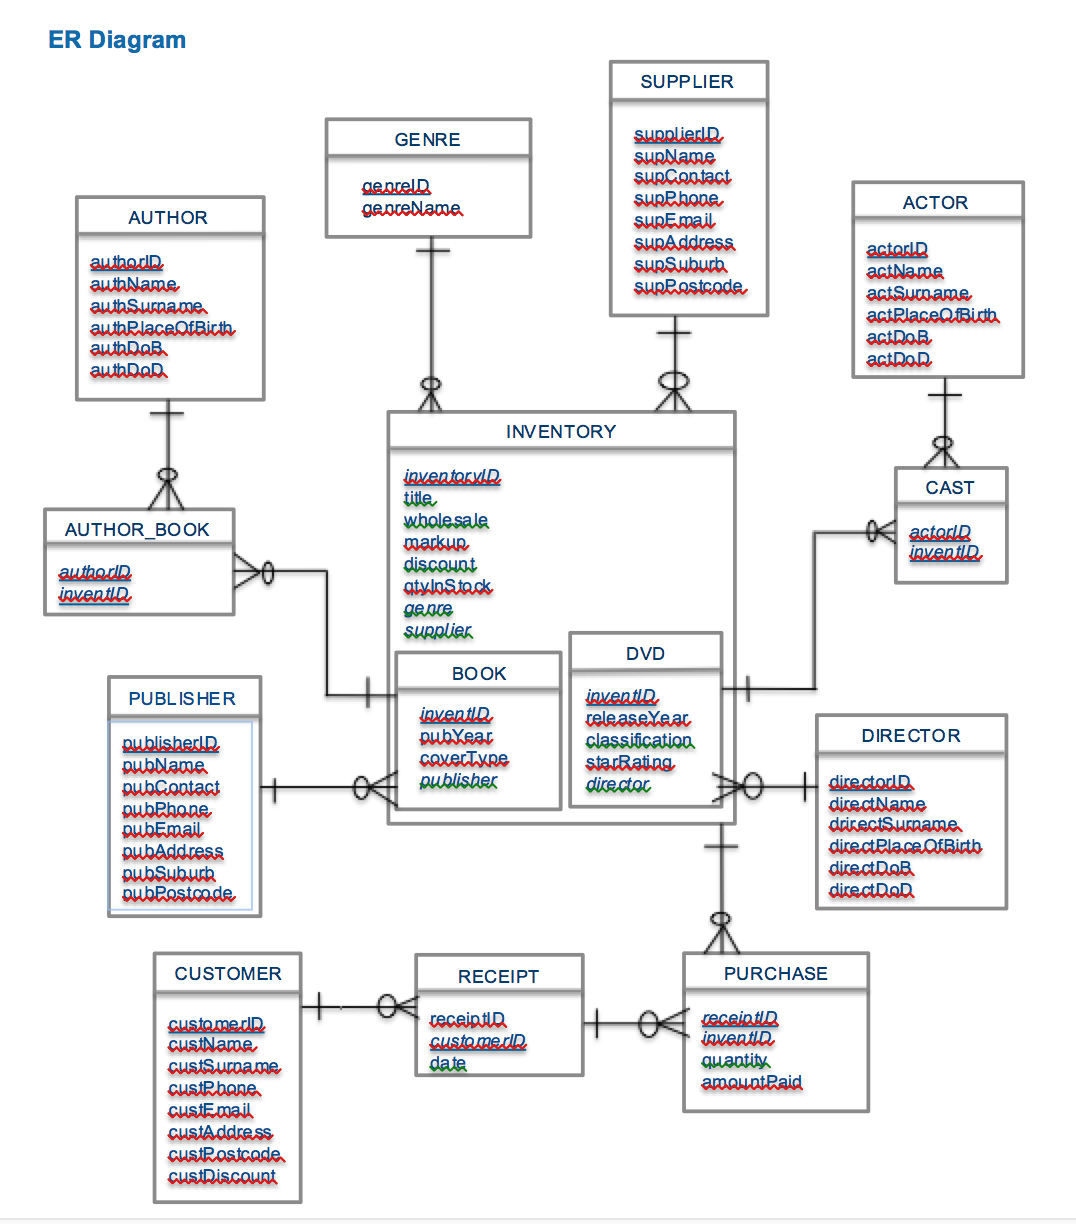 How Many Tables Will The Relational Schema Have For This Er regarding Er Diagram Relational Schema